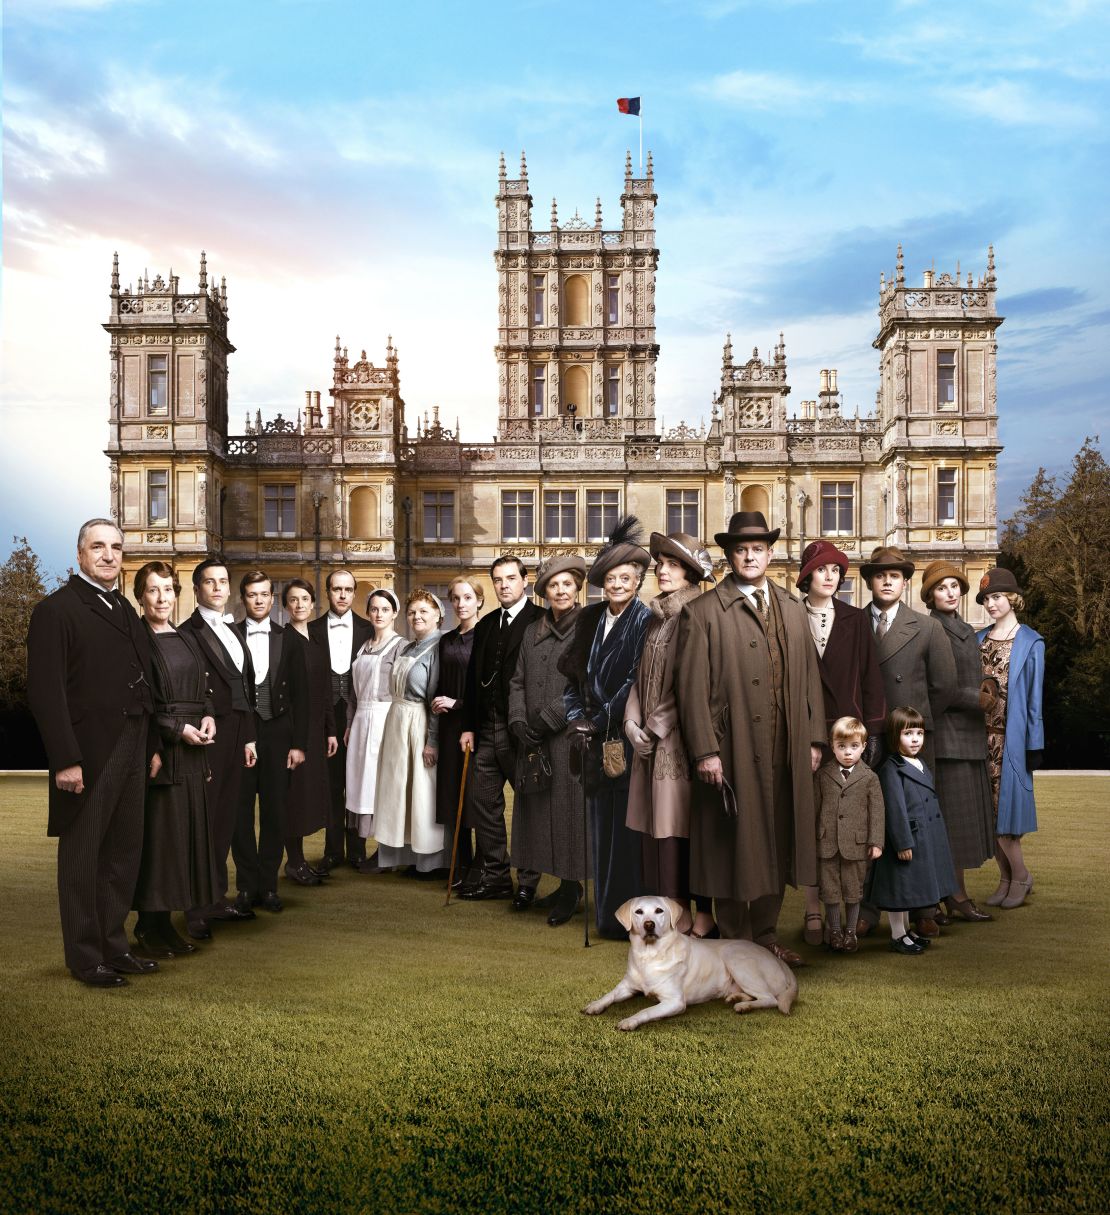 'Downton Abbey' (C) Nick Briggs/Carnival Films 2014 for Masterpiece
